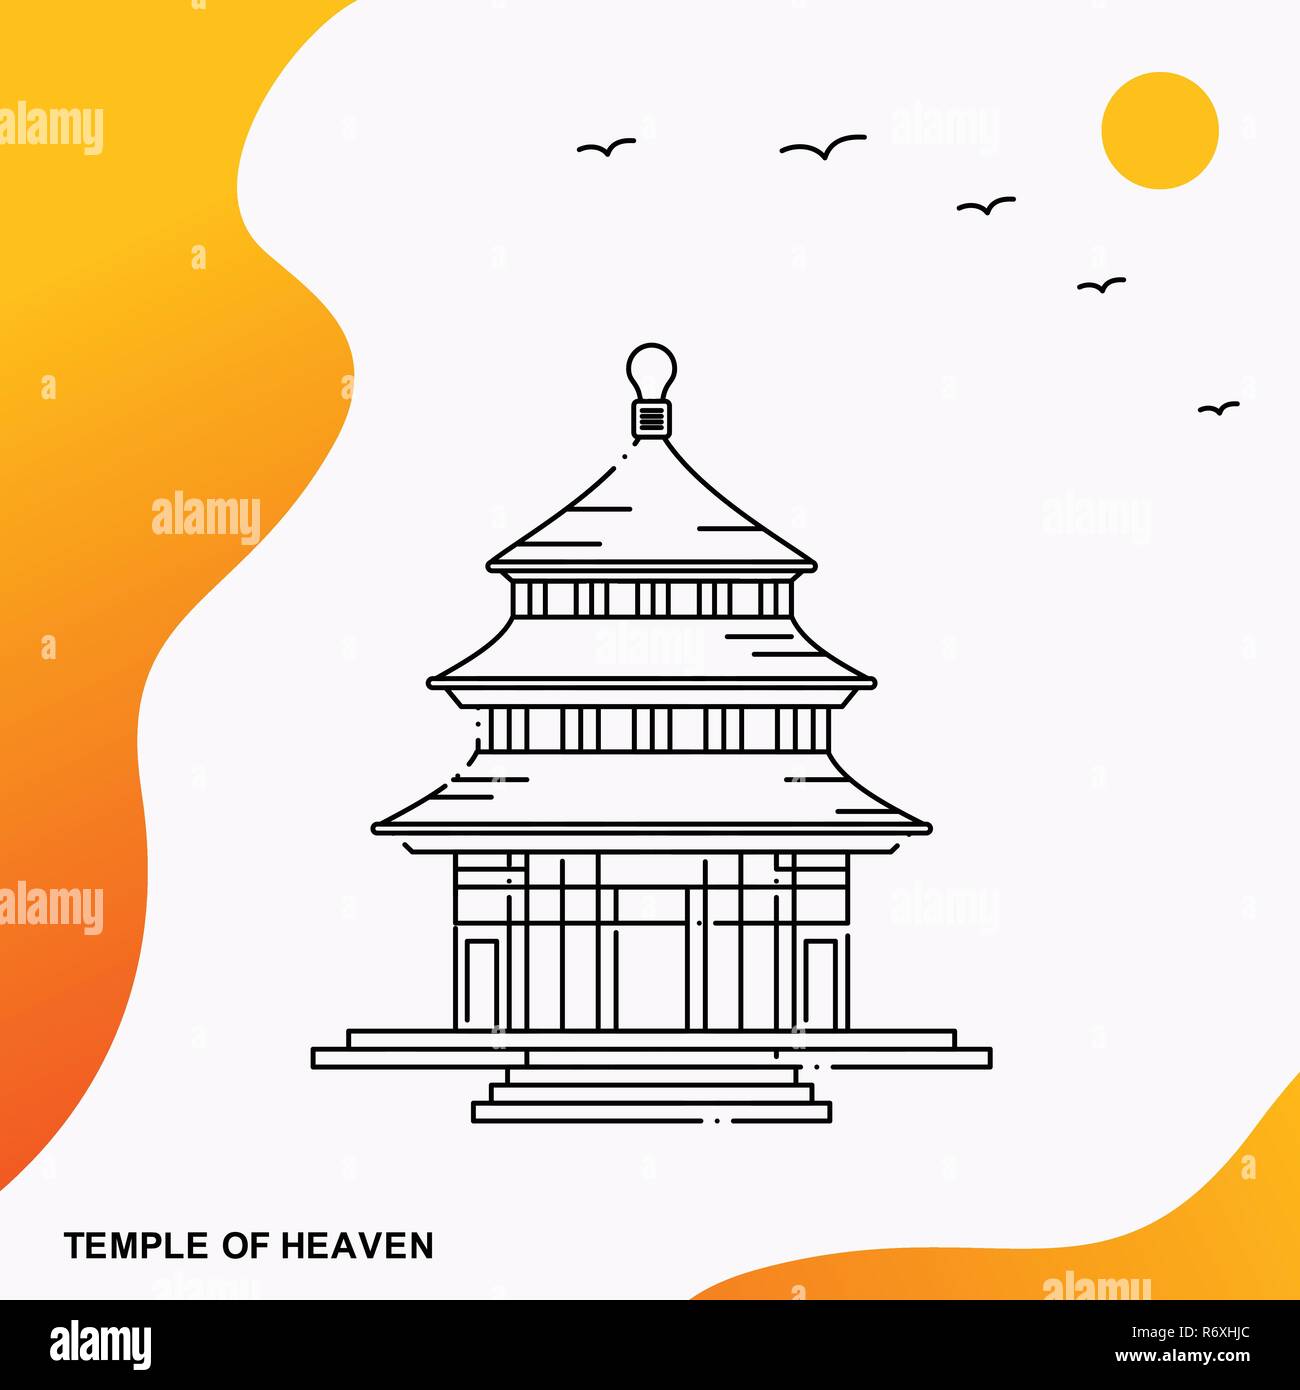 Travel TEMPLE OF HEAVEN Poster Template Stock Vector